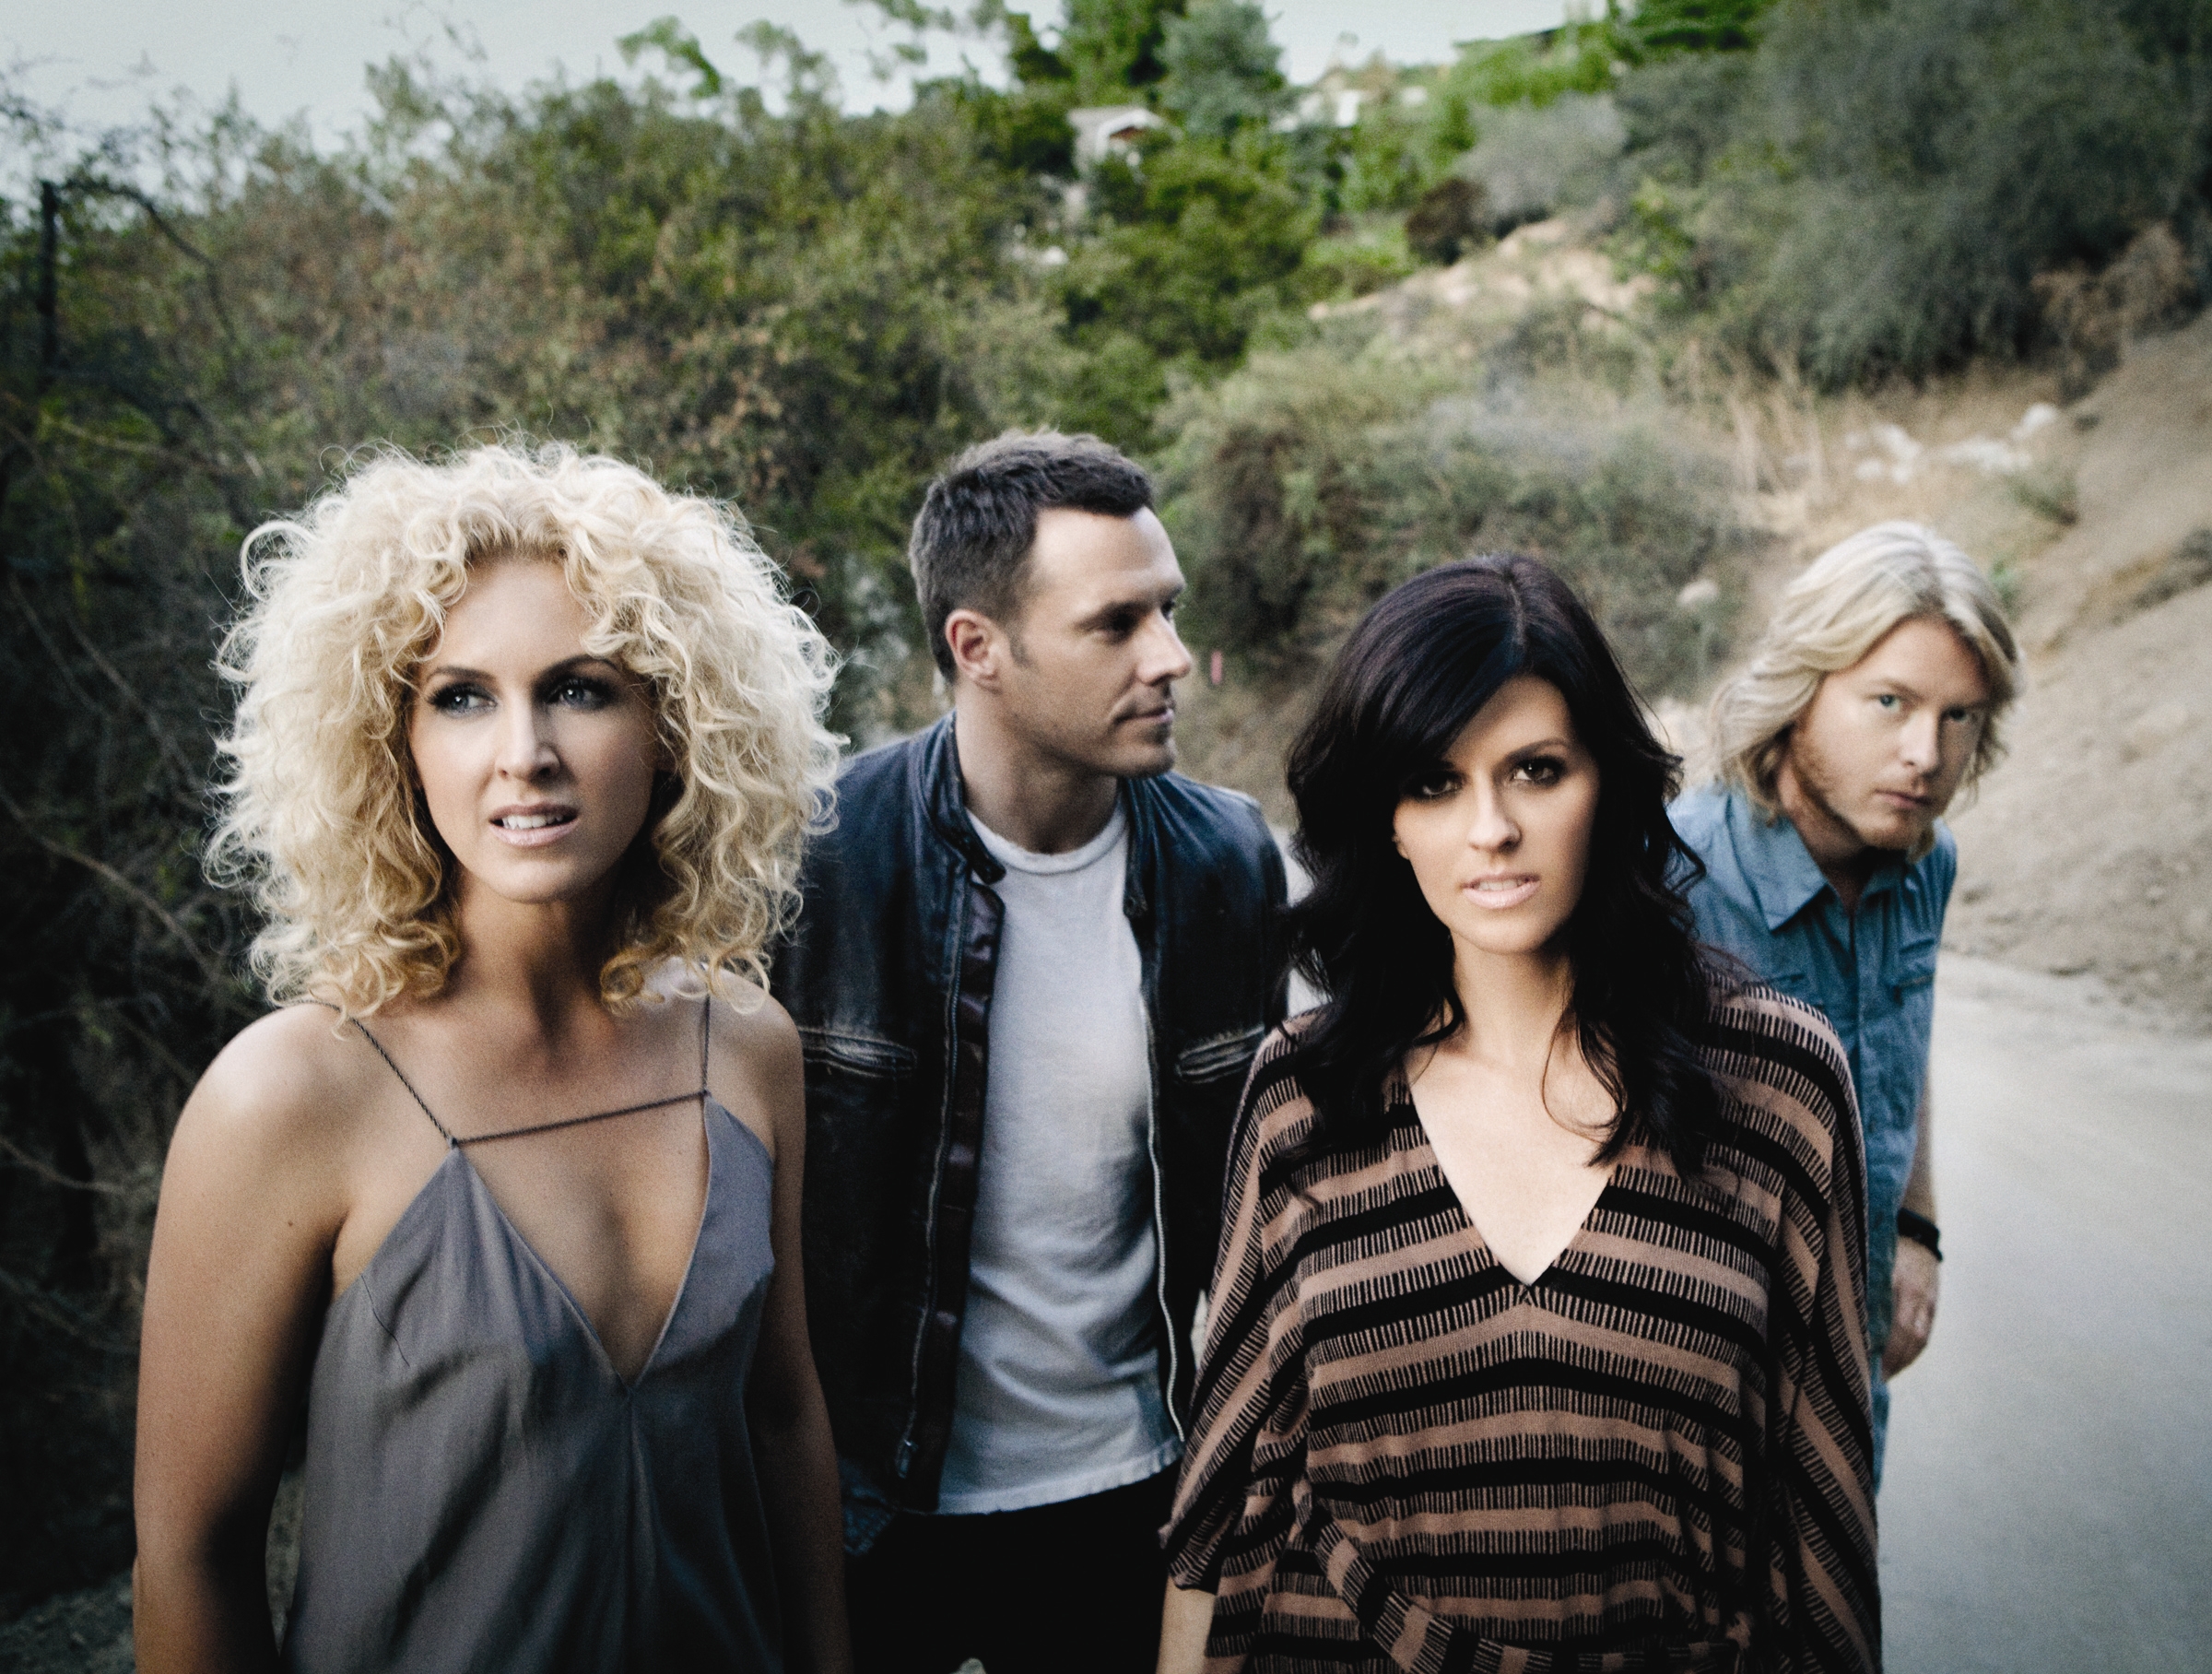 Little Big Town to Perform the National Anthem Prior to the Kentucky Oaks